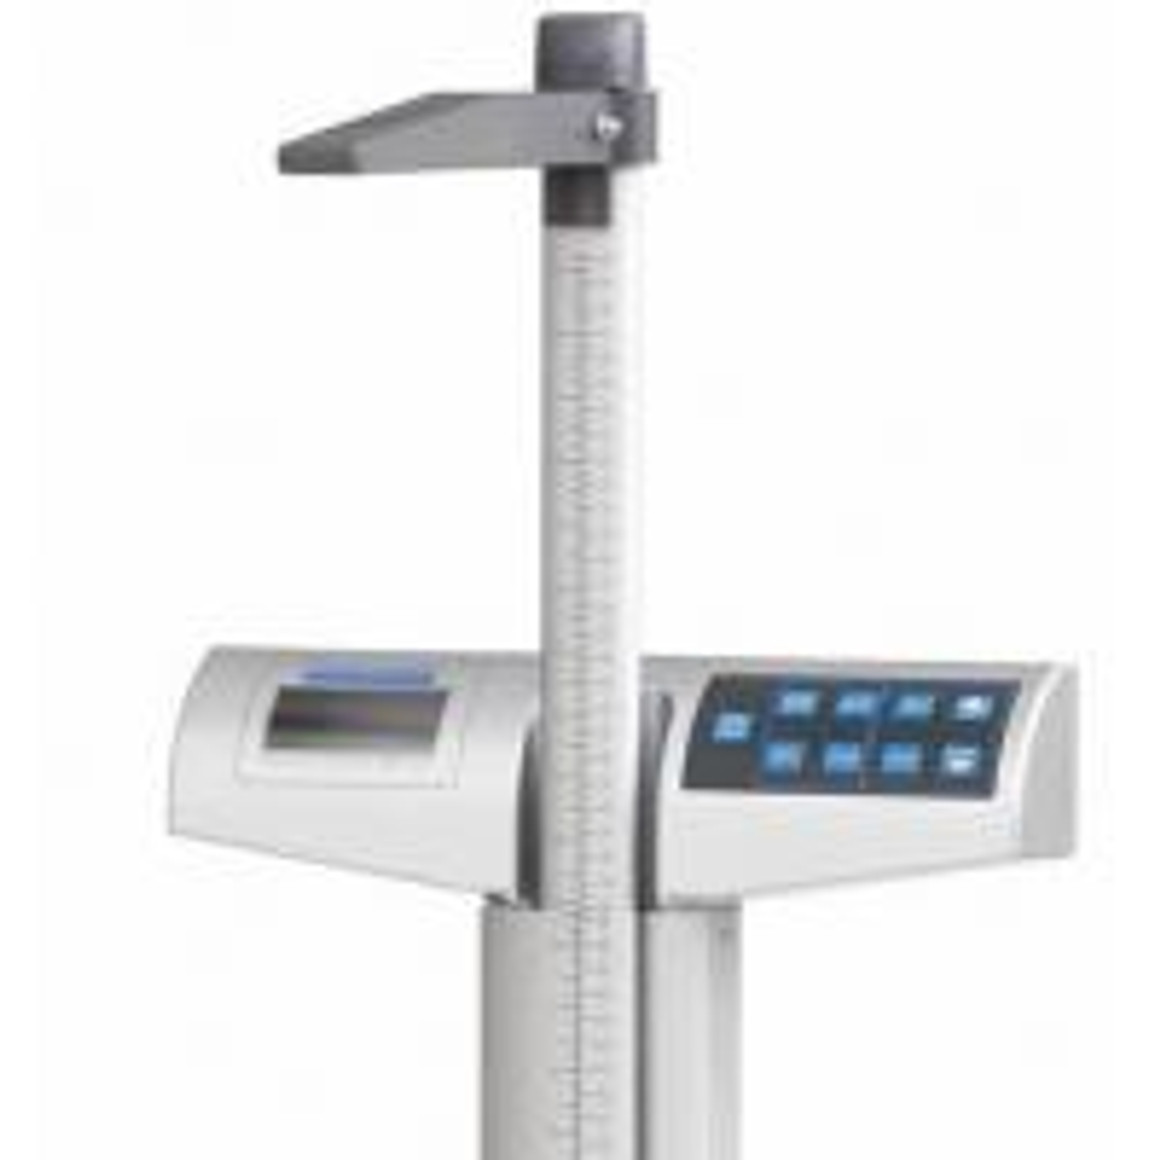 Health O Meter Digital Column Scale with Height Rod 550 lbs / 250 kg  Capacity